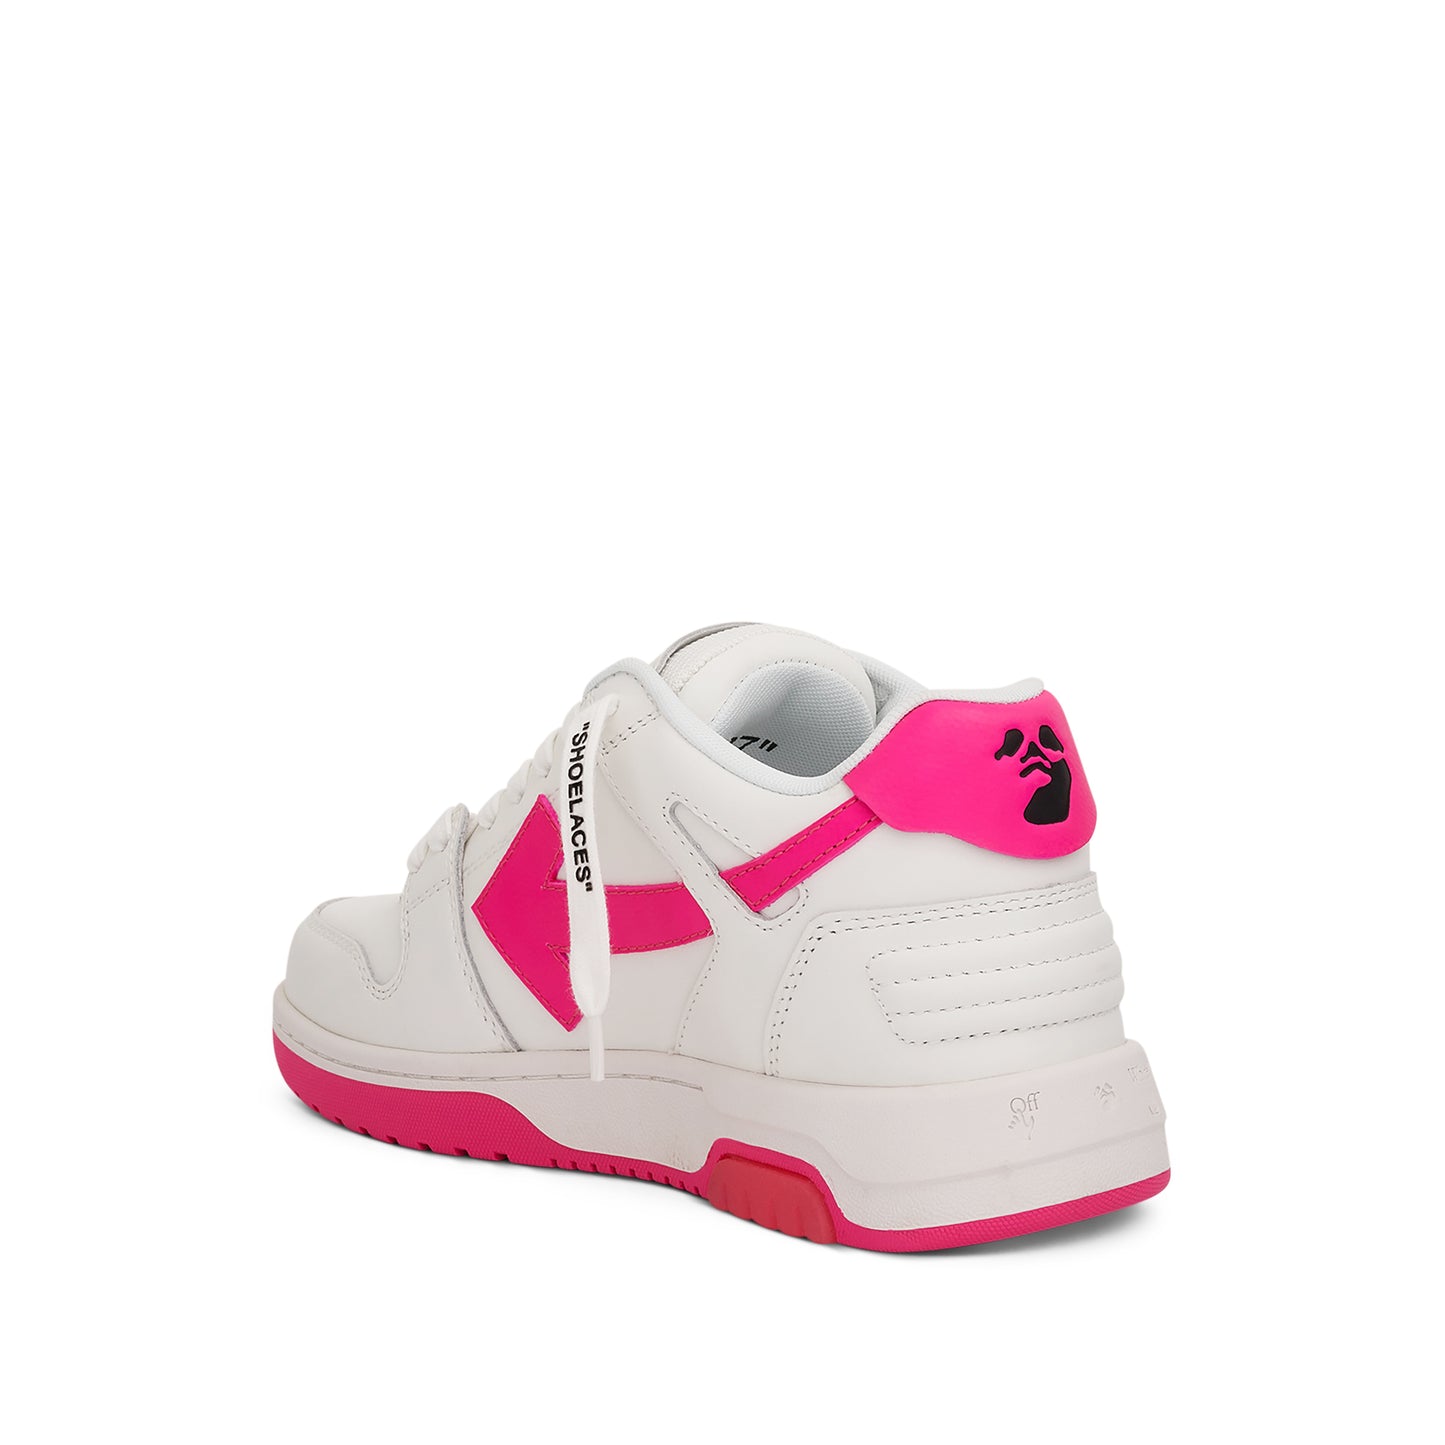 Out Of Office Calf Leather Sneaker in White/Fuchsia